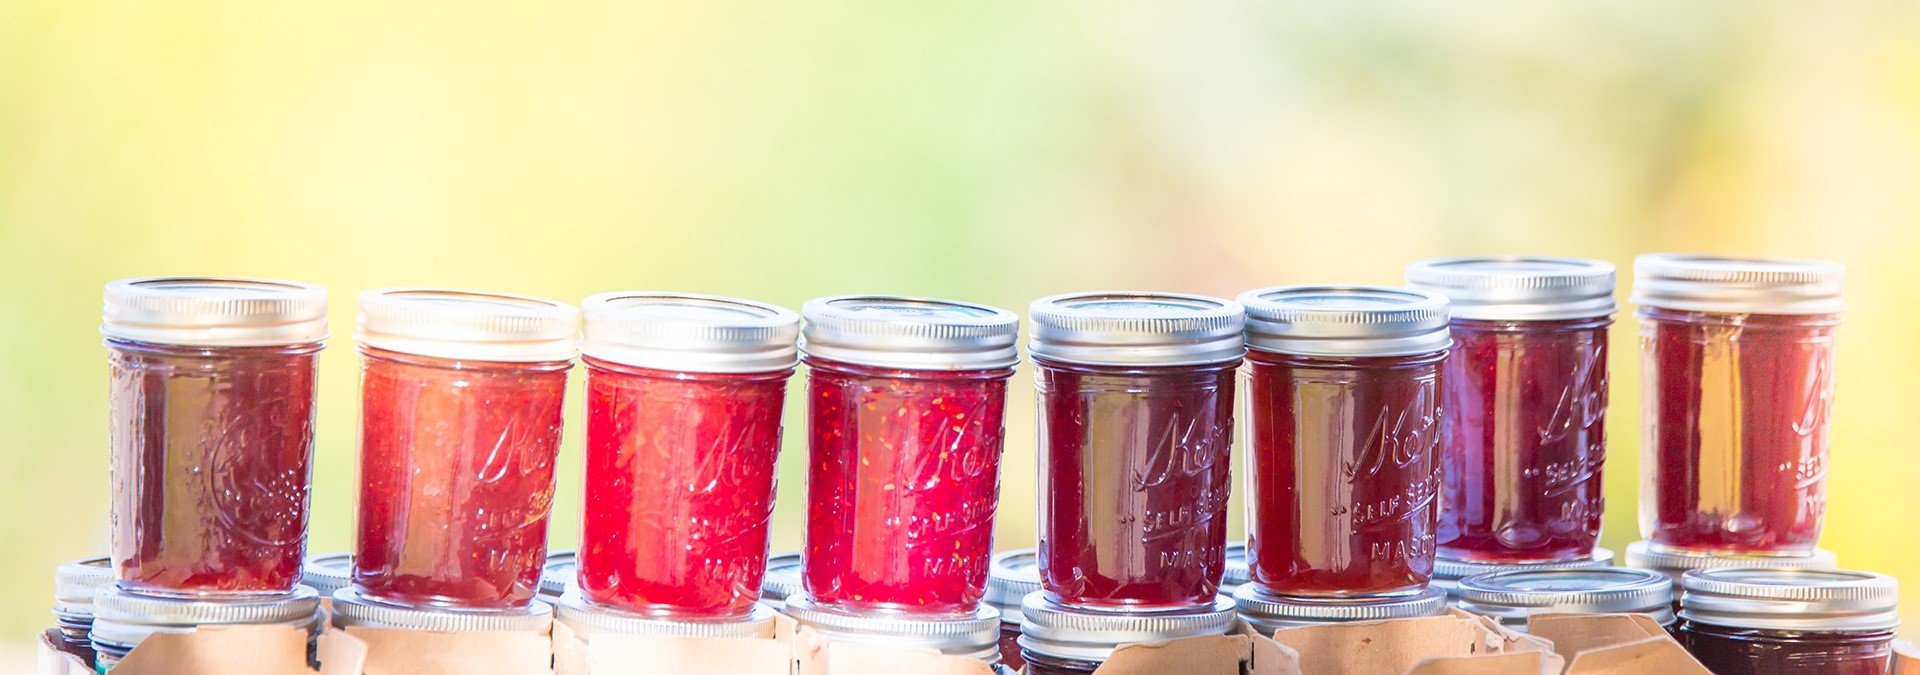 Jars of jam lined up